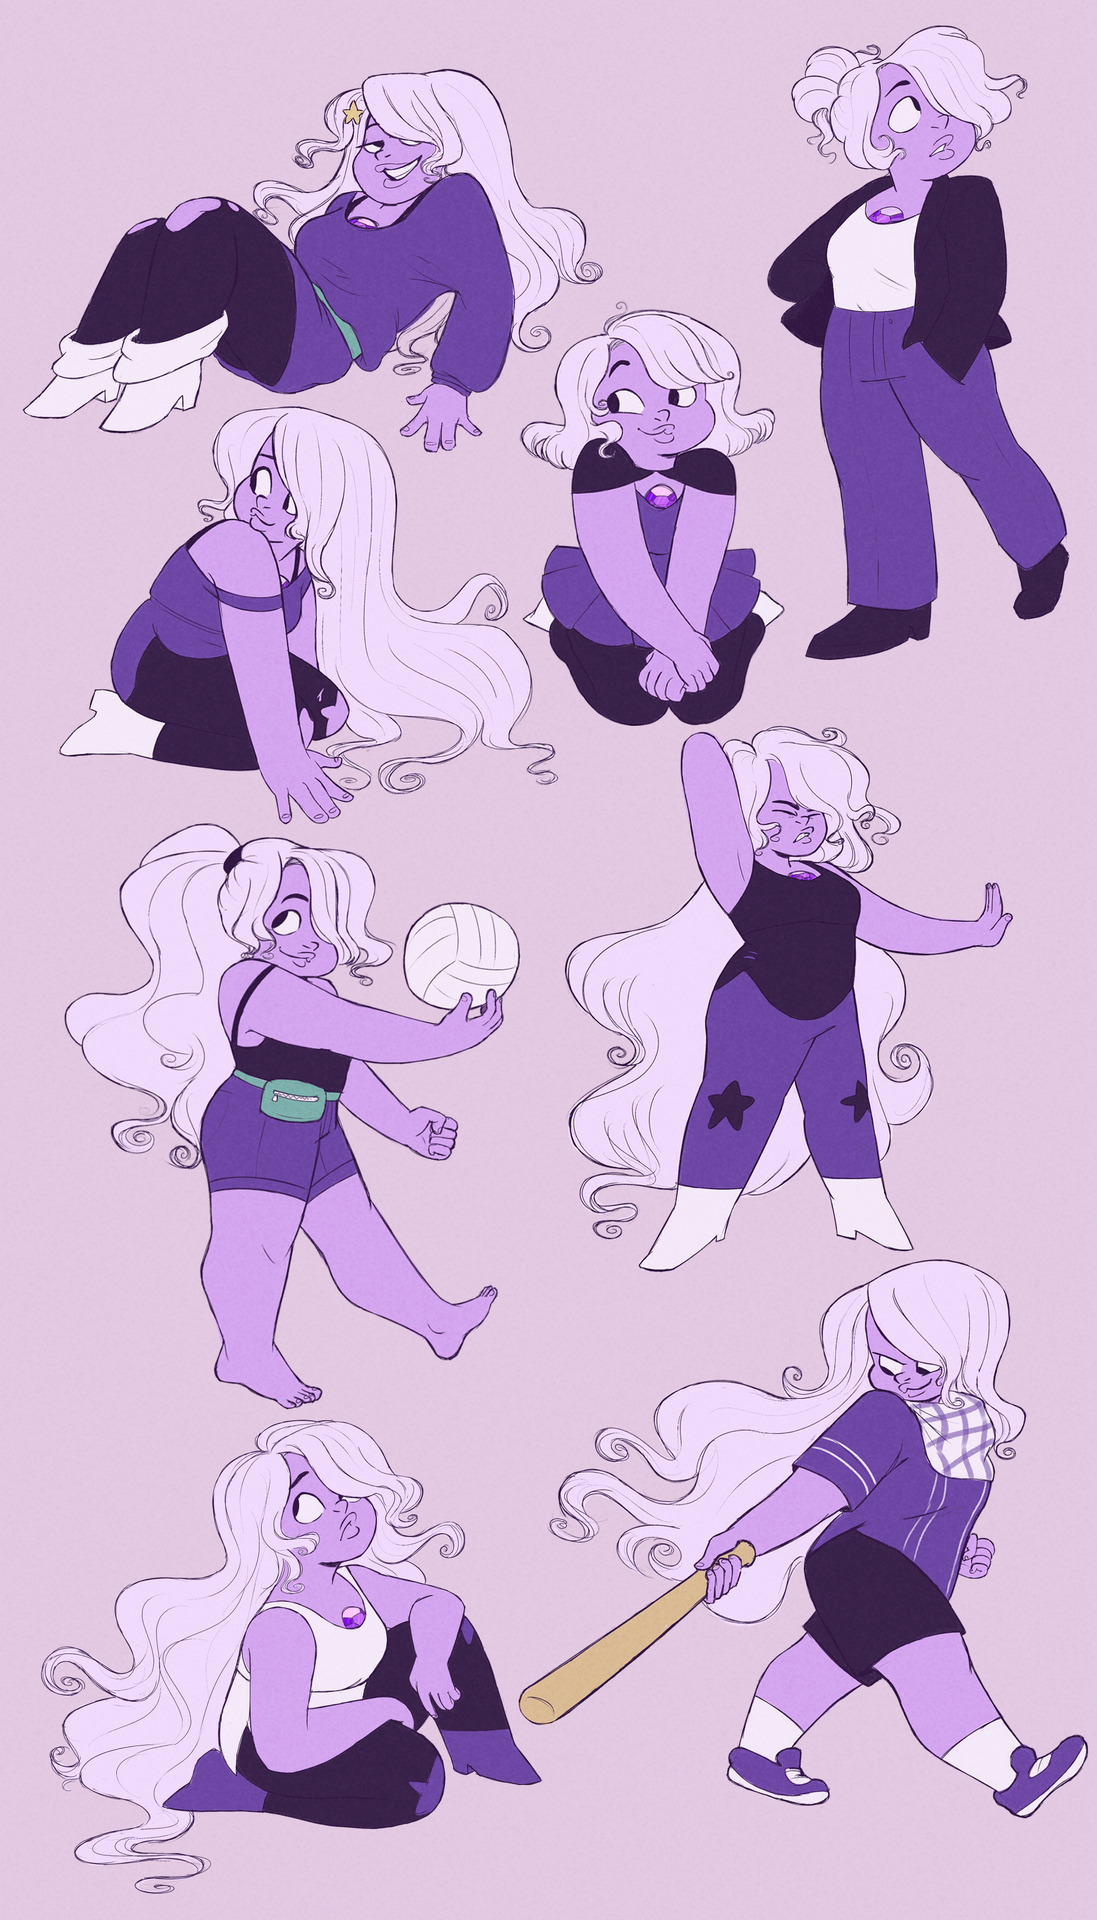 Oh Amethyst, you have so many looks